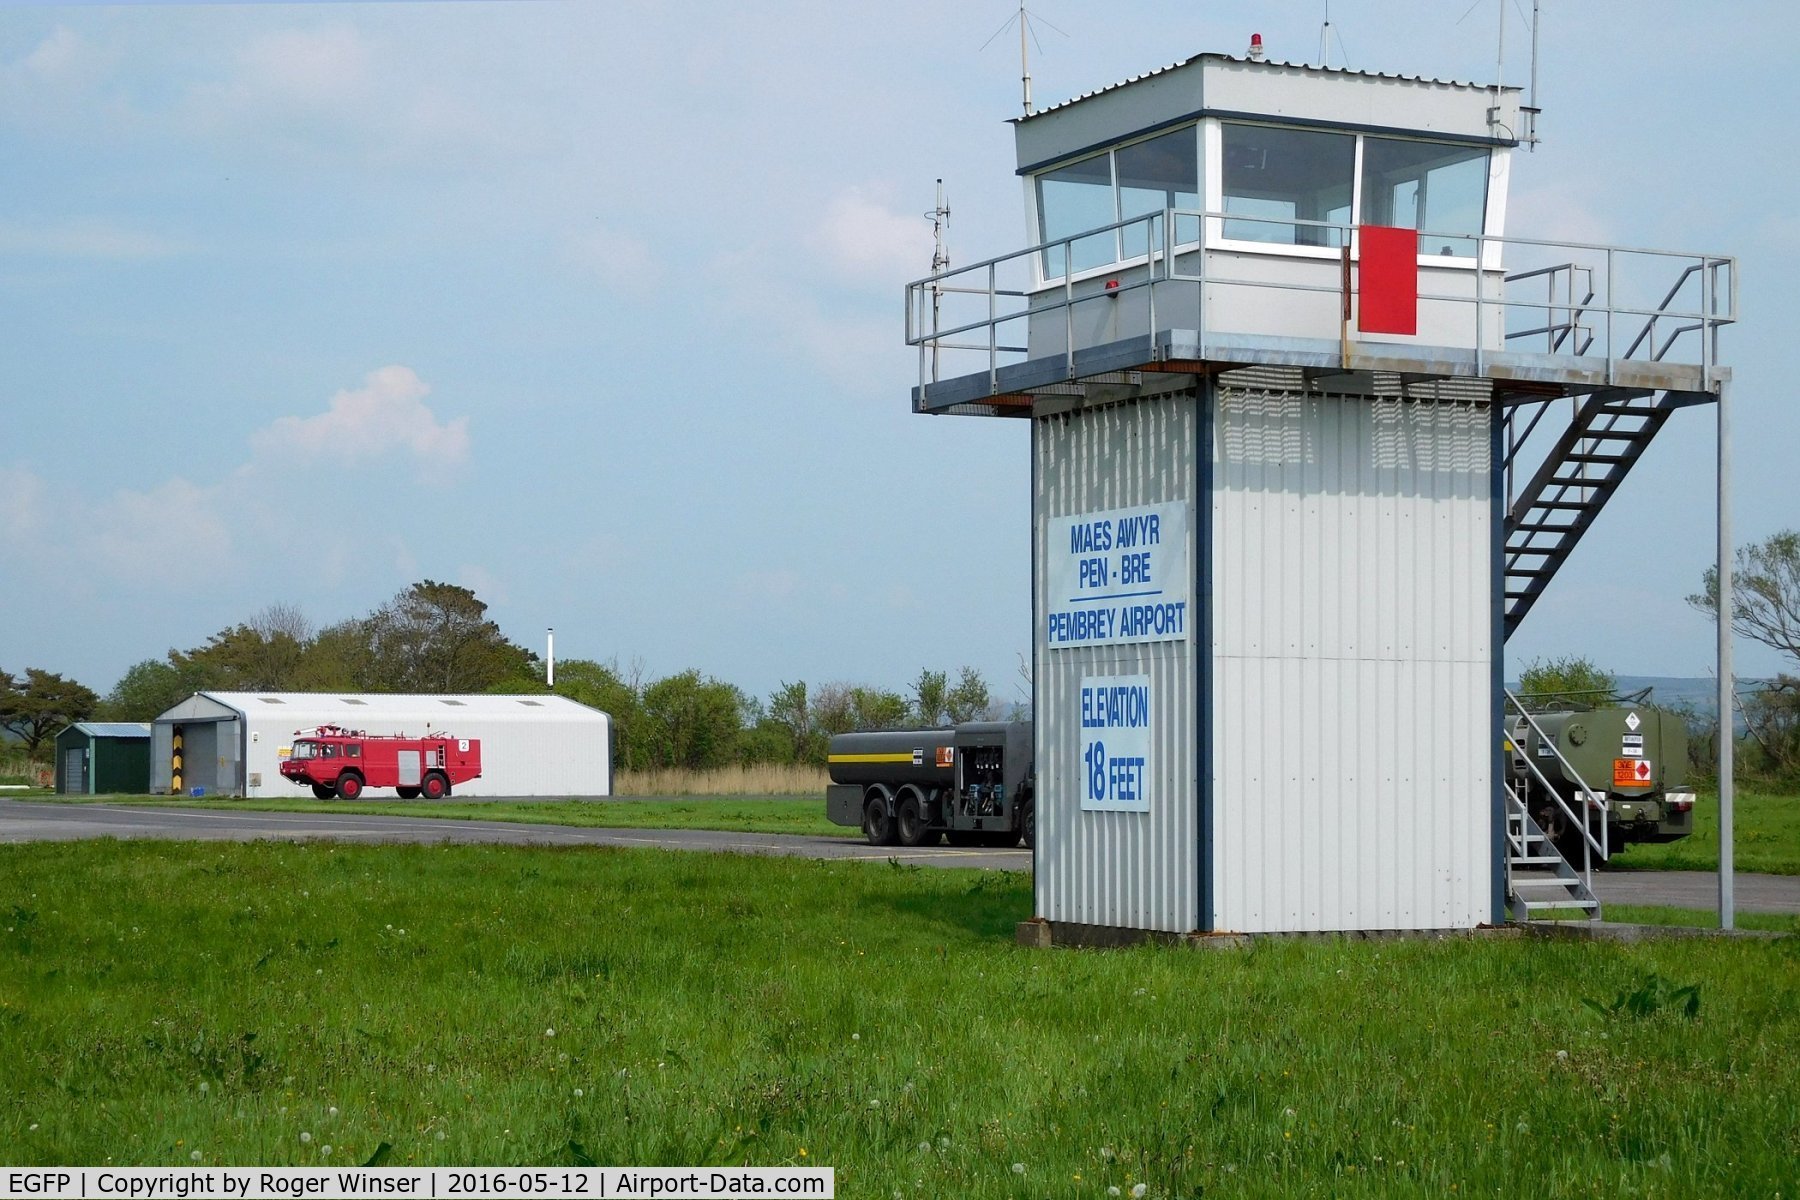 Pembrey Airport, Pembrey, Wales United Kingdom (EGFP) - Fire and Rescue tender No.2, aviation fuel tankers and Control Tower.